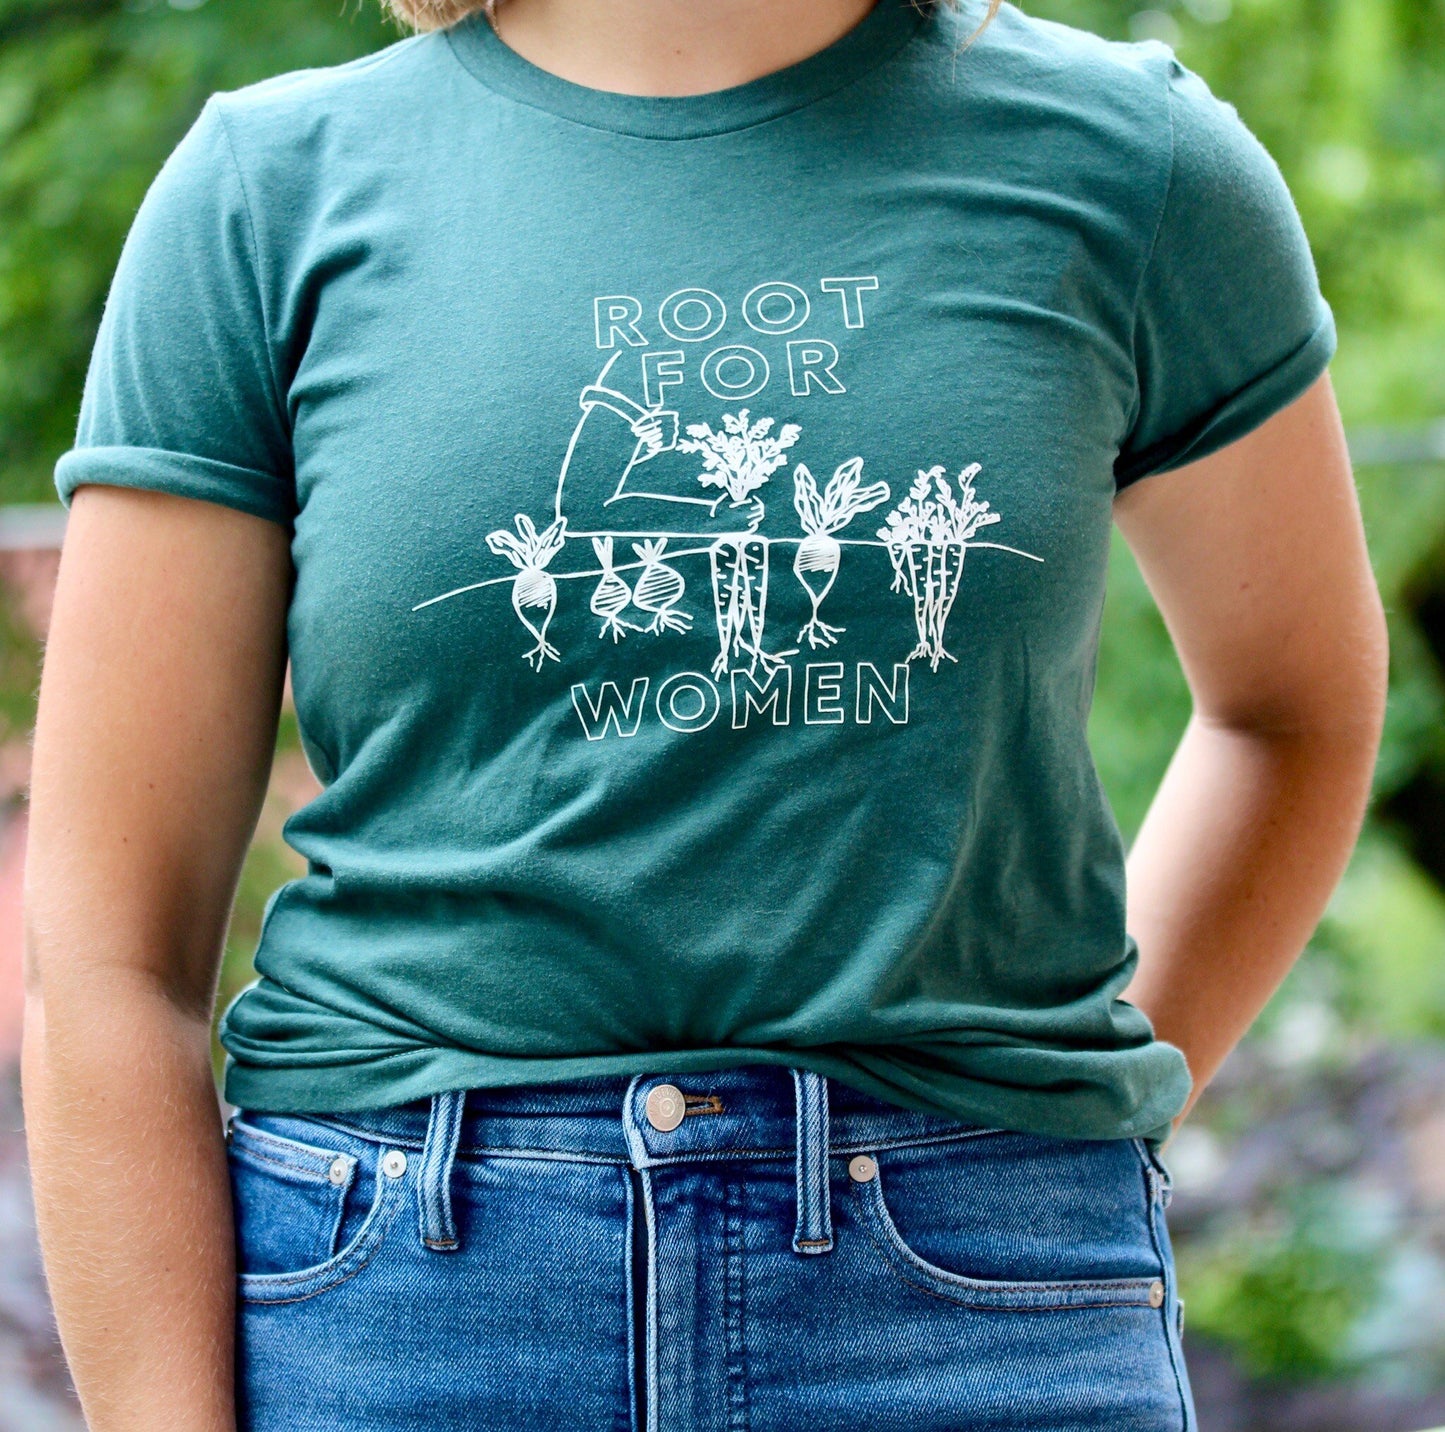 A woman wears a green t-shirt that reads "Root for Women" with jeans